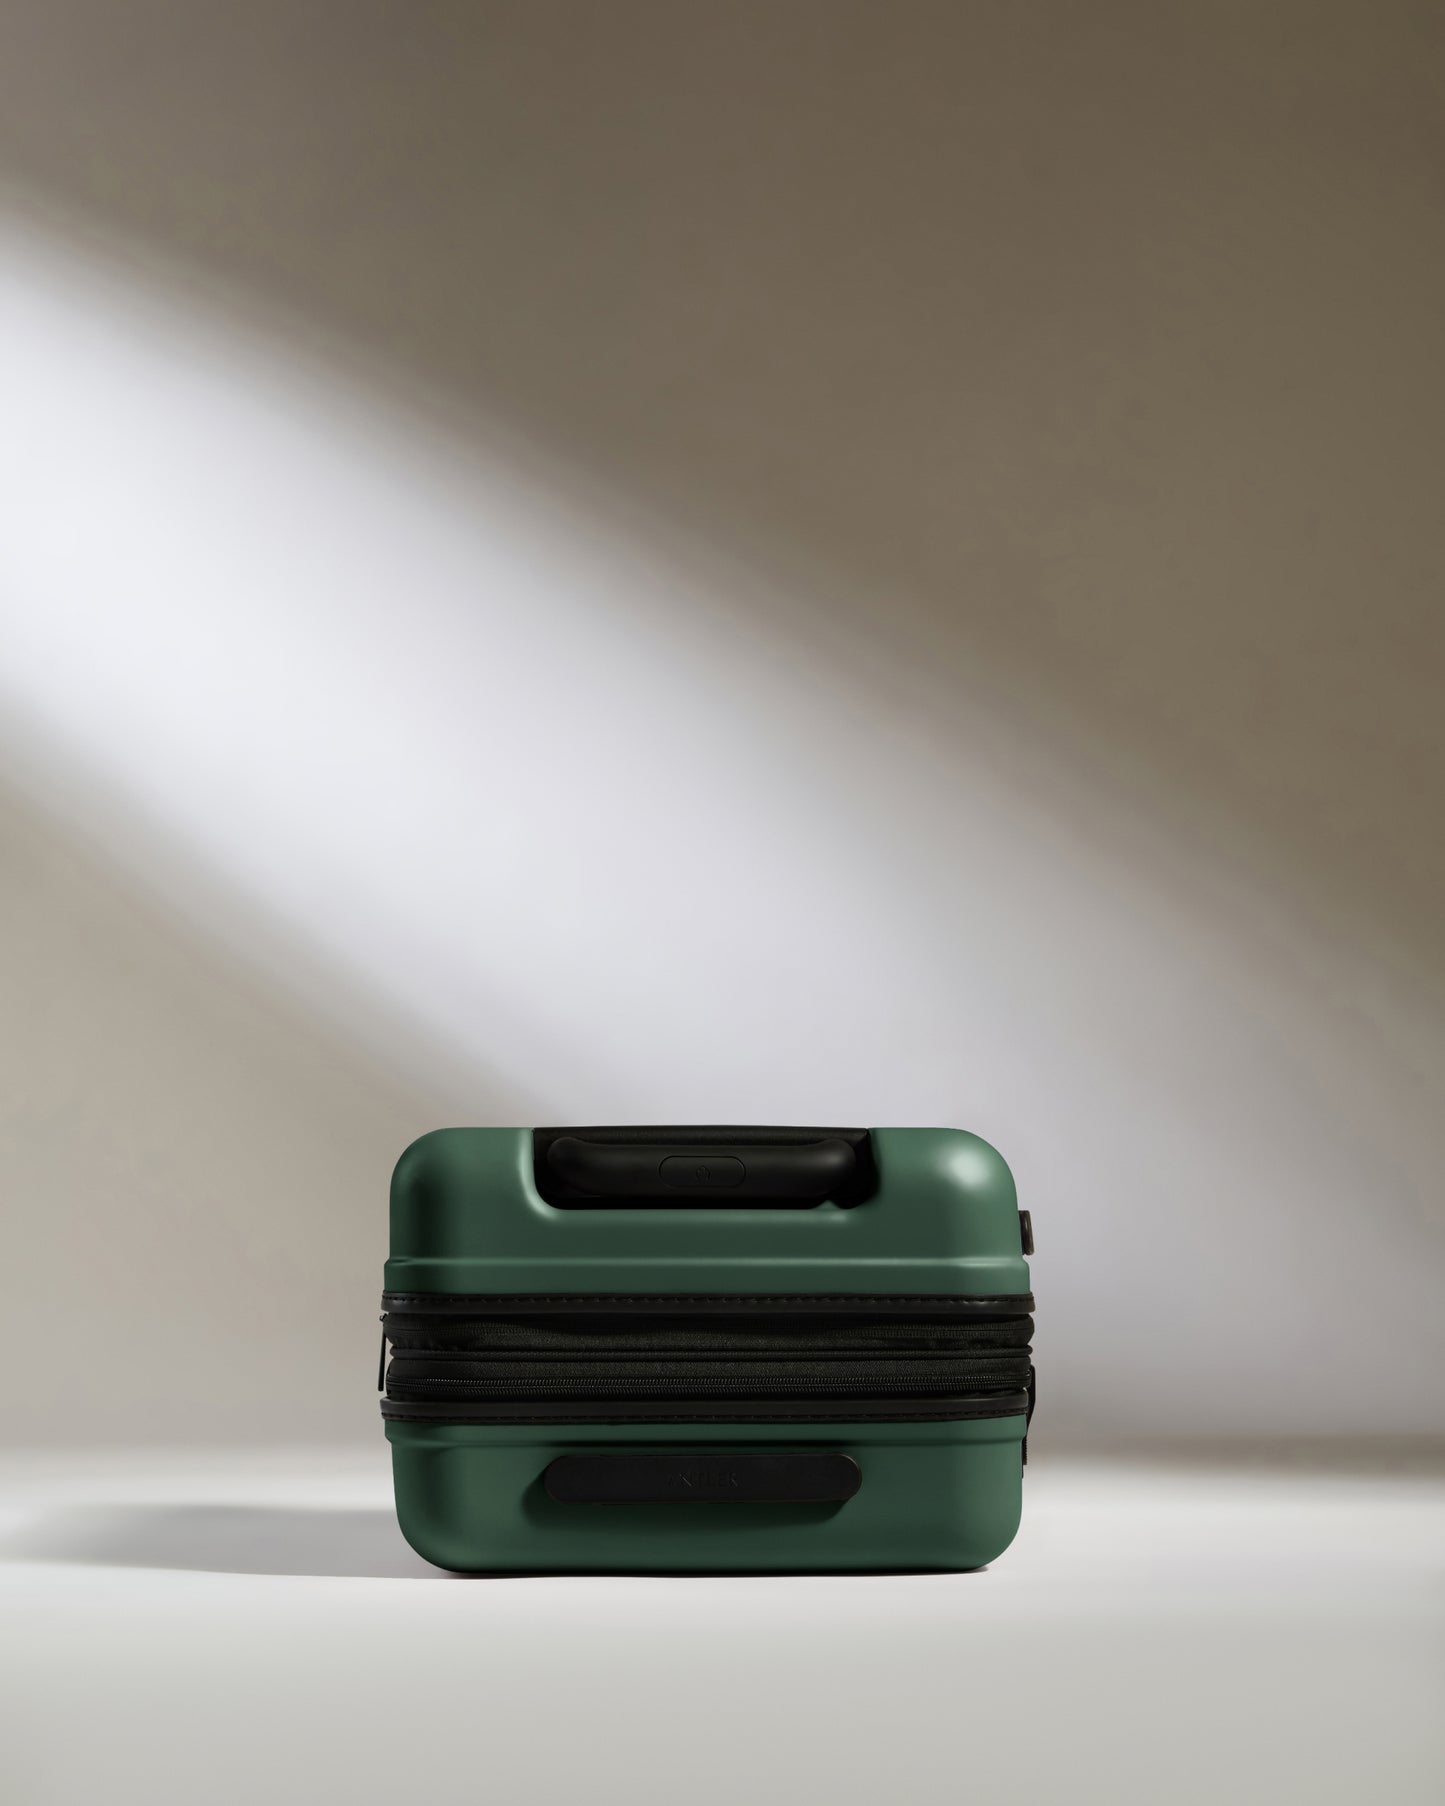 Icon Stripe Carry-On with Expander in Antler Green